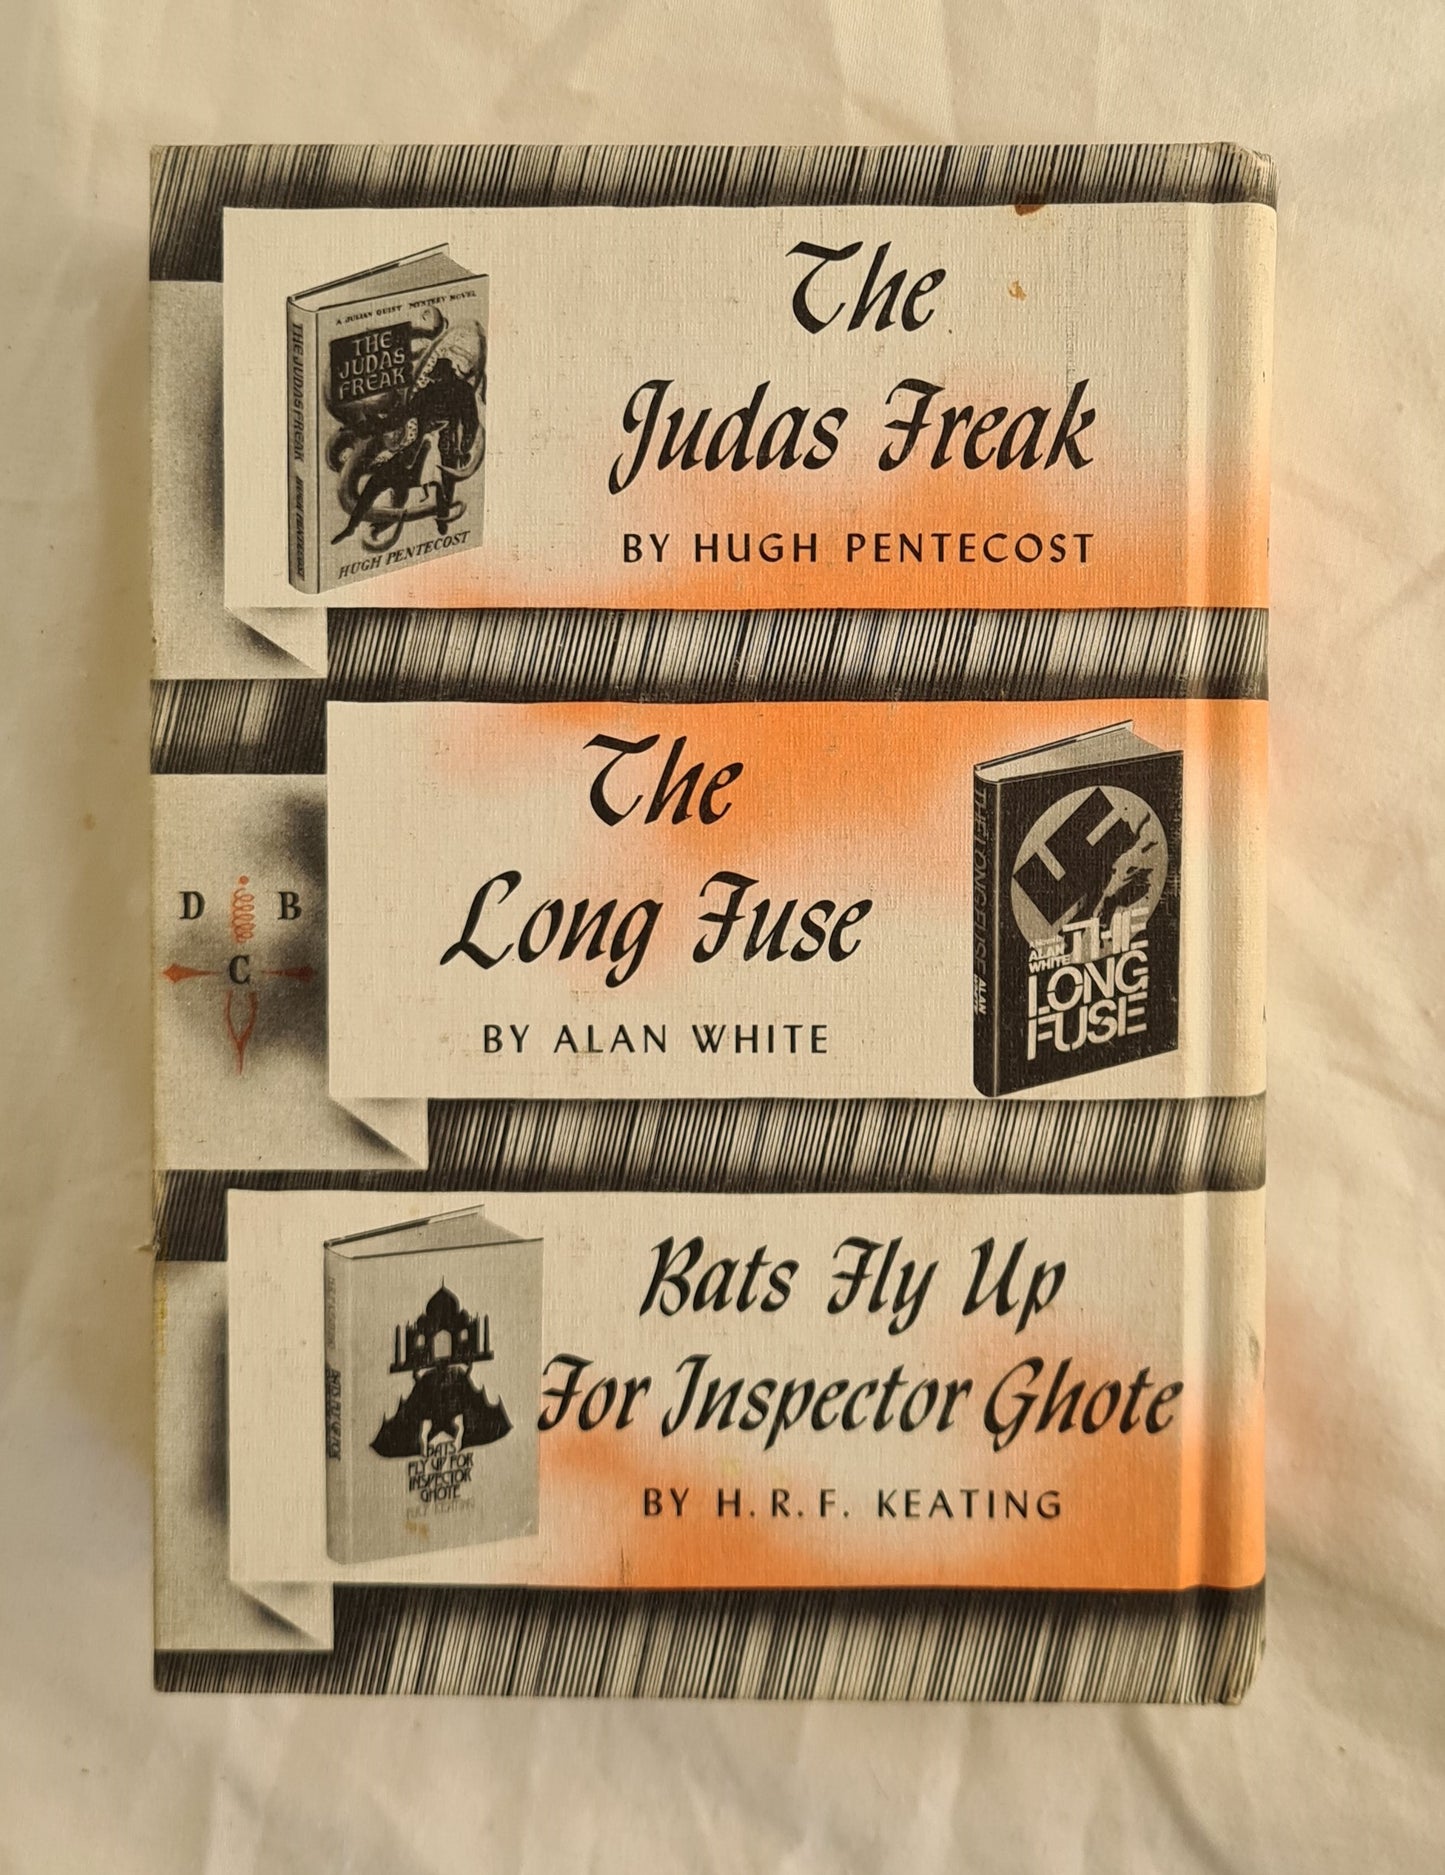 The Judas Freak; The Long Fuse; Bats Fly Up for Inspector Ghote  by Hugh Pentecost, Alan White and H. R. F. Keating